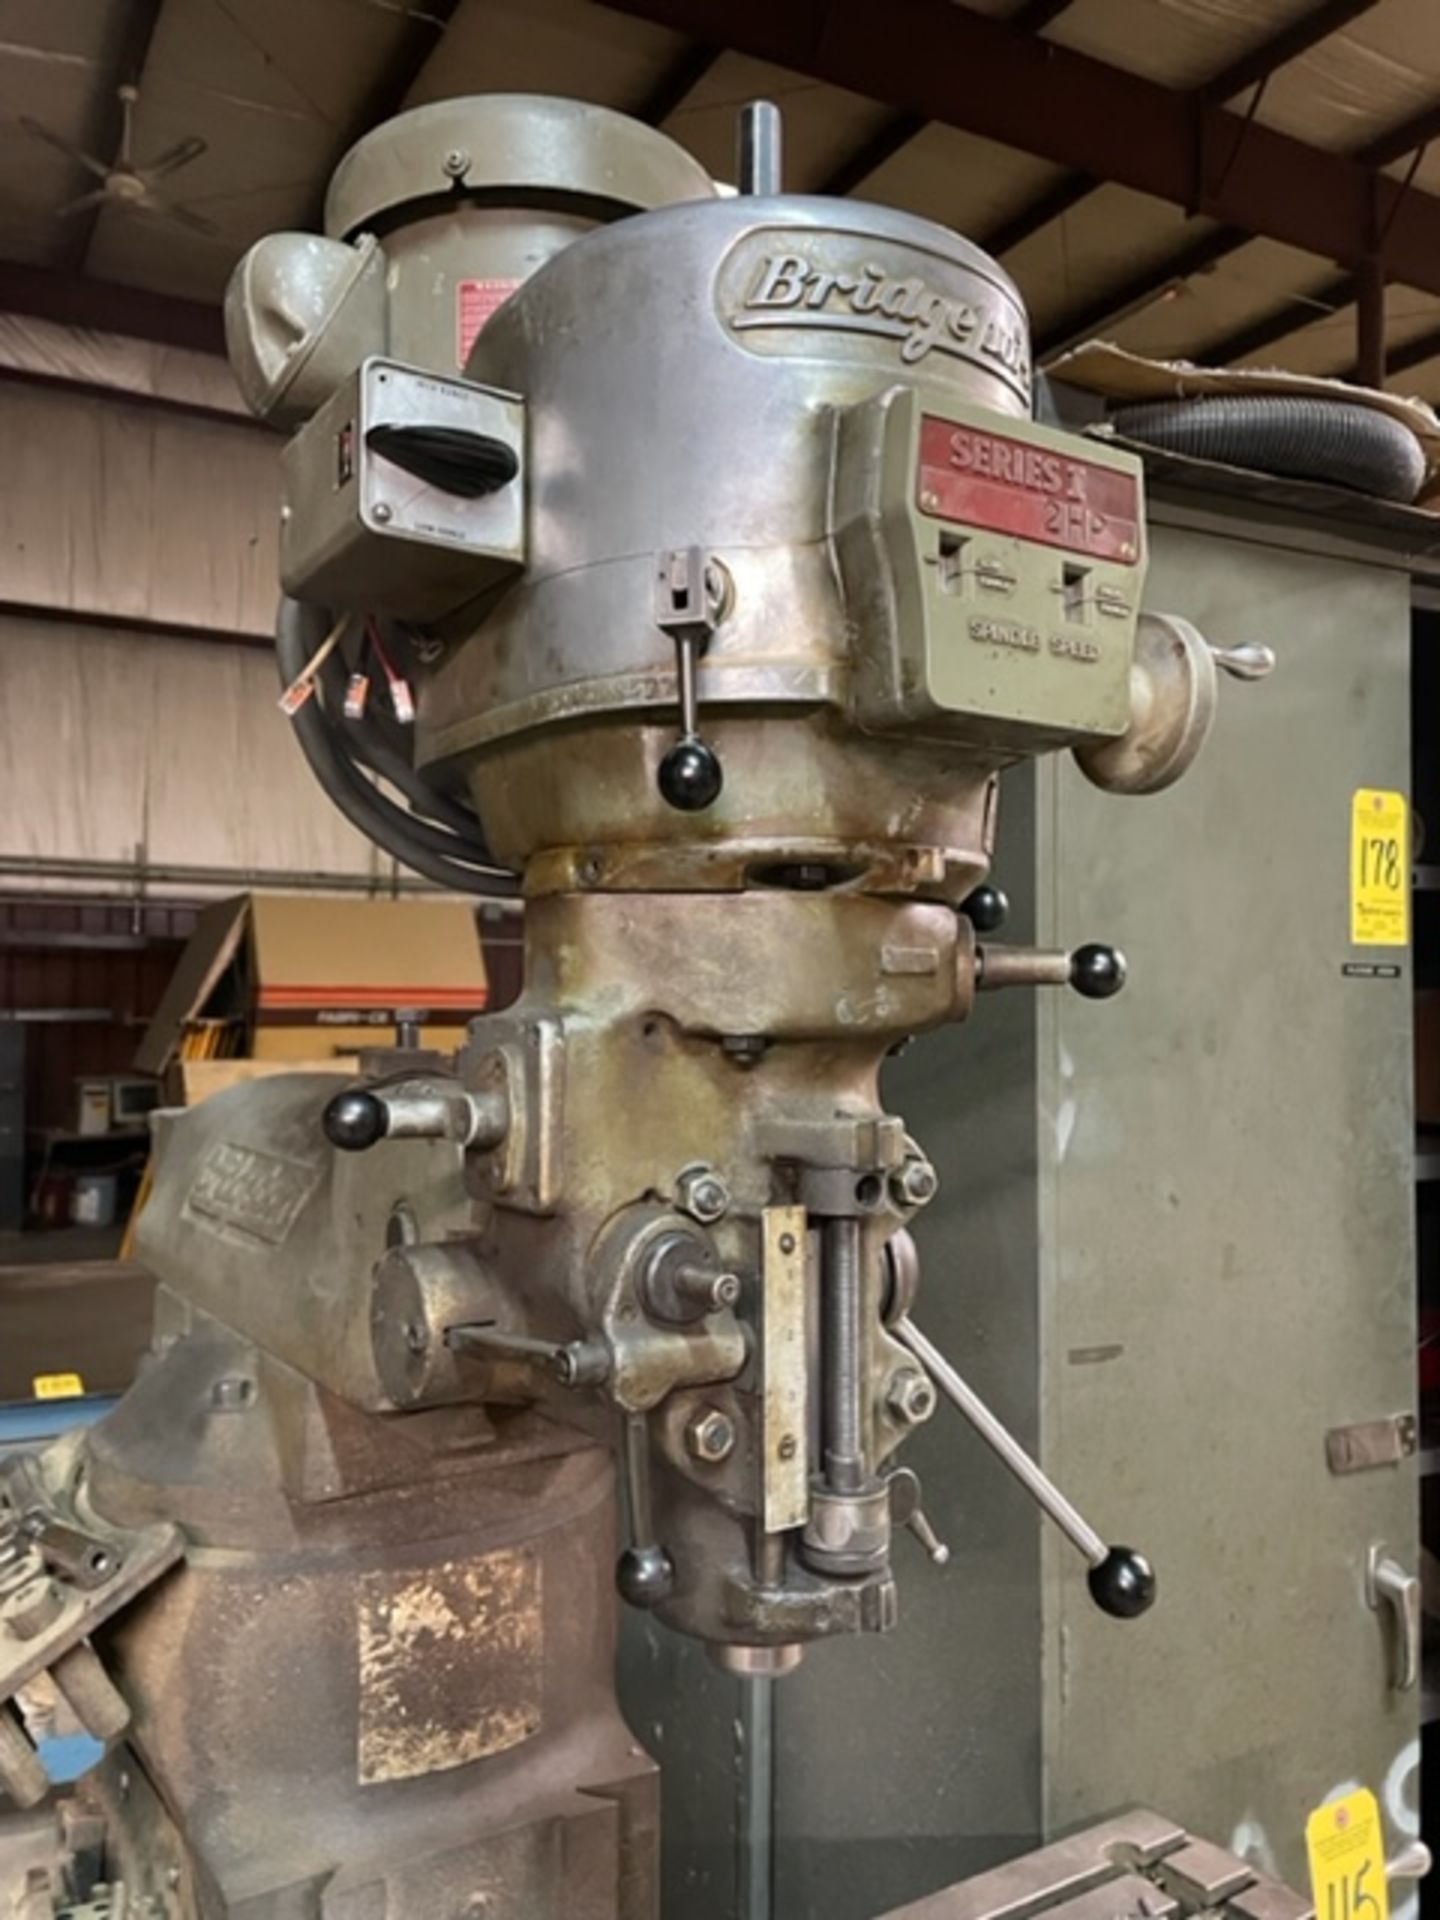 Bridgeport Series I, 2 HP Vertical Mill, 9" X 42" Table, Head Recently Rebuilt, Loading Fee $100.00 - Image 3 of 7